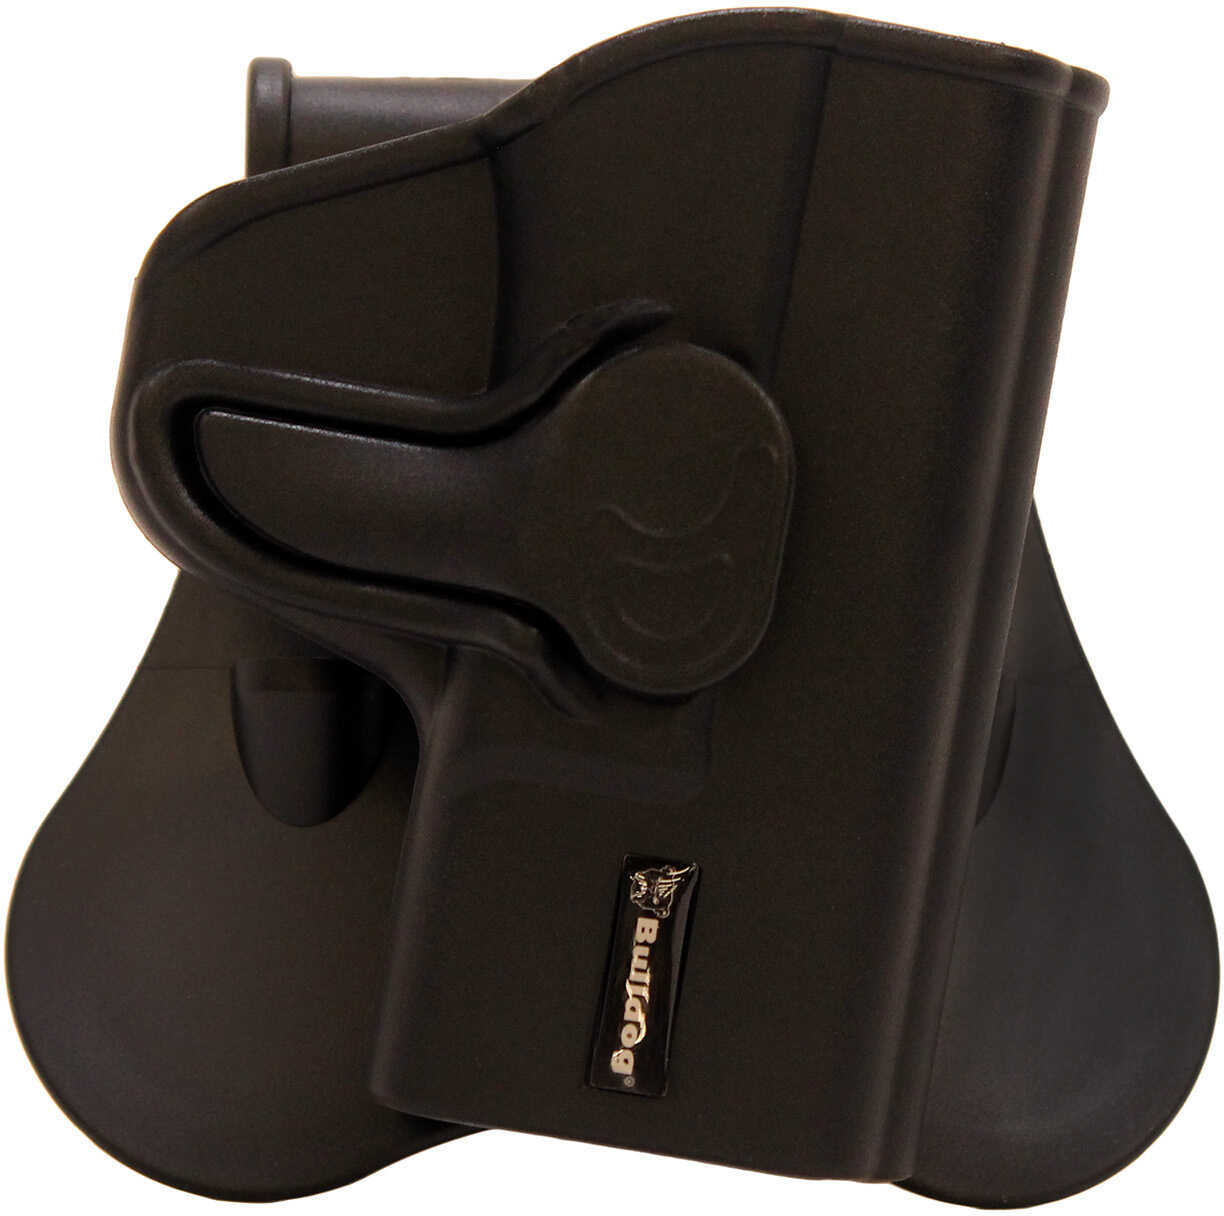 Bulldog Rapid Release Polymer Holster w/Paddle - RH Only Fits S&W M&P Shield